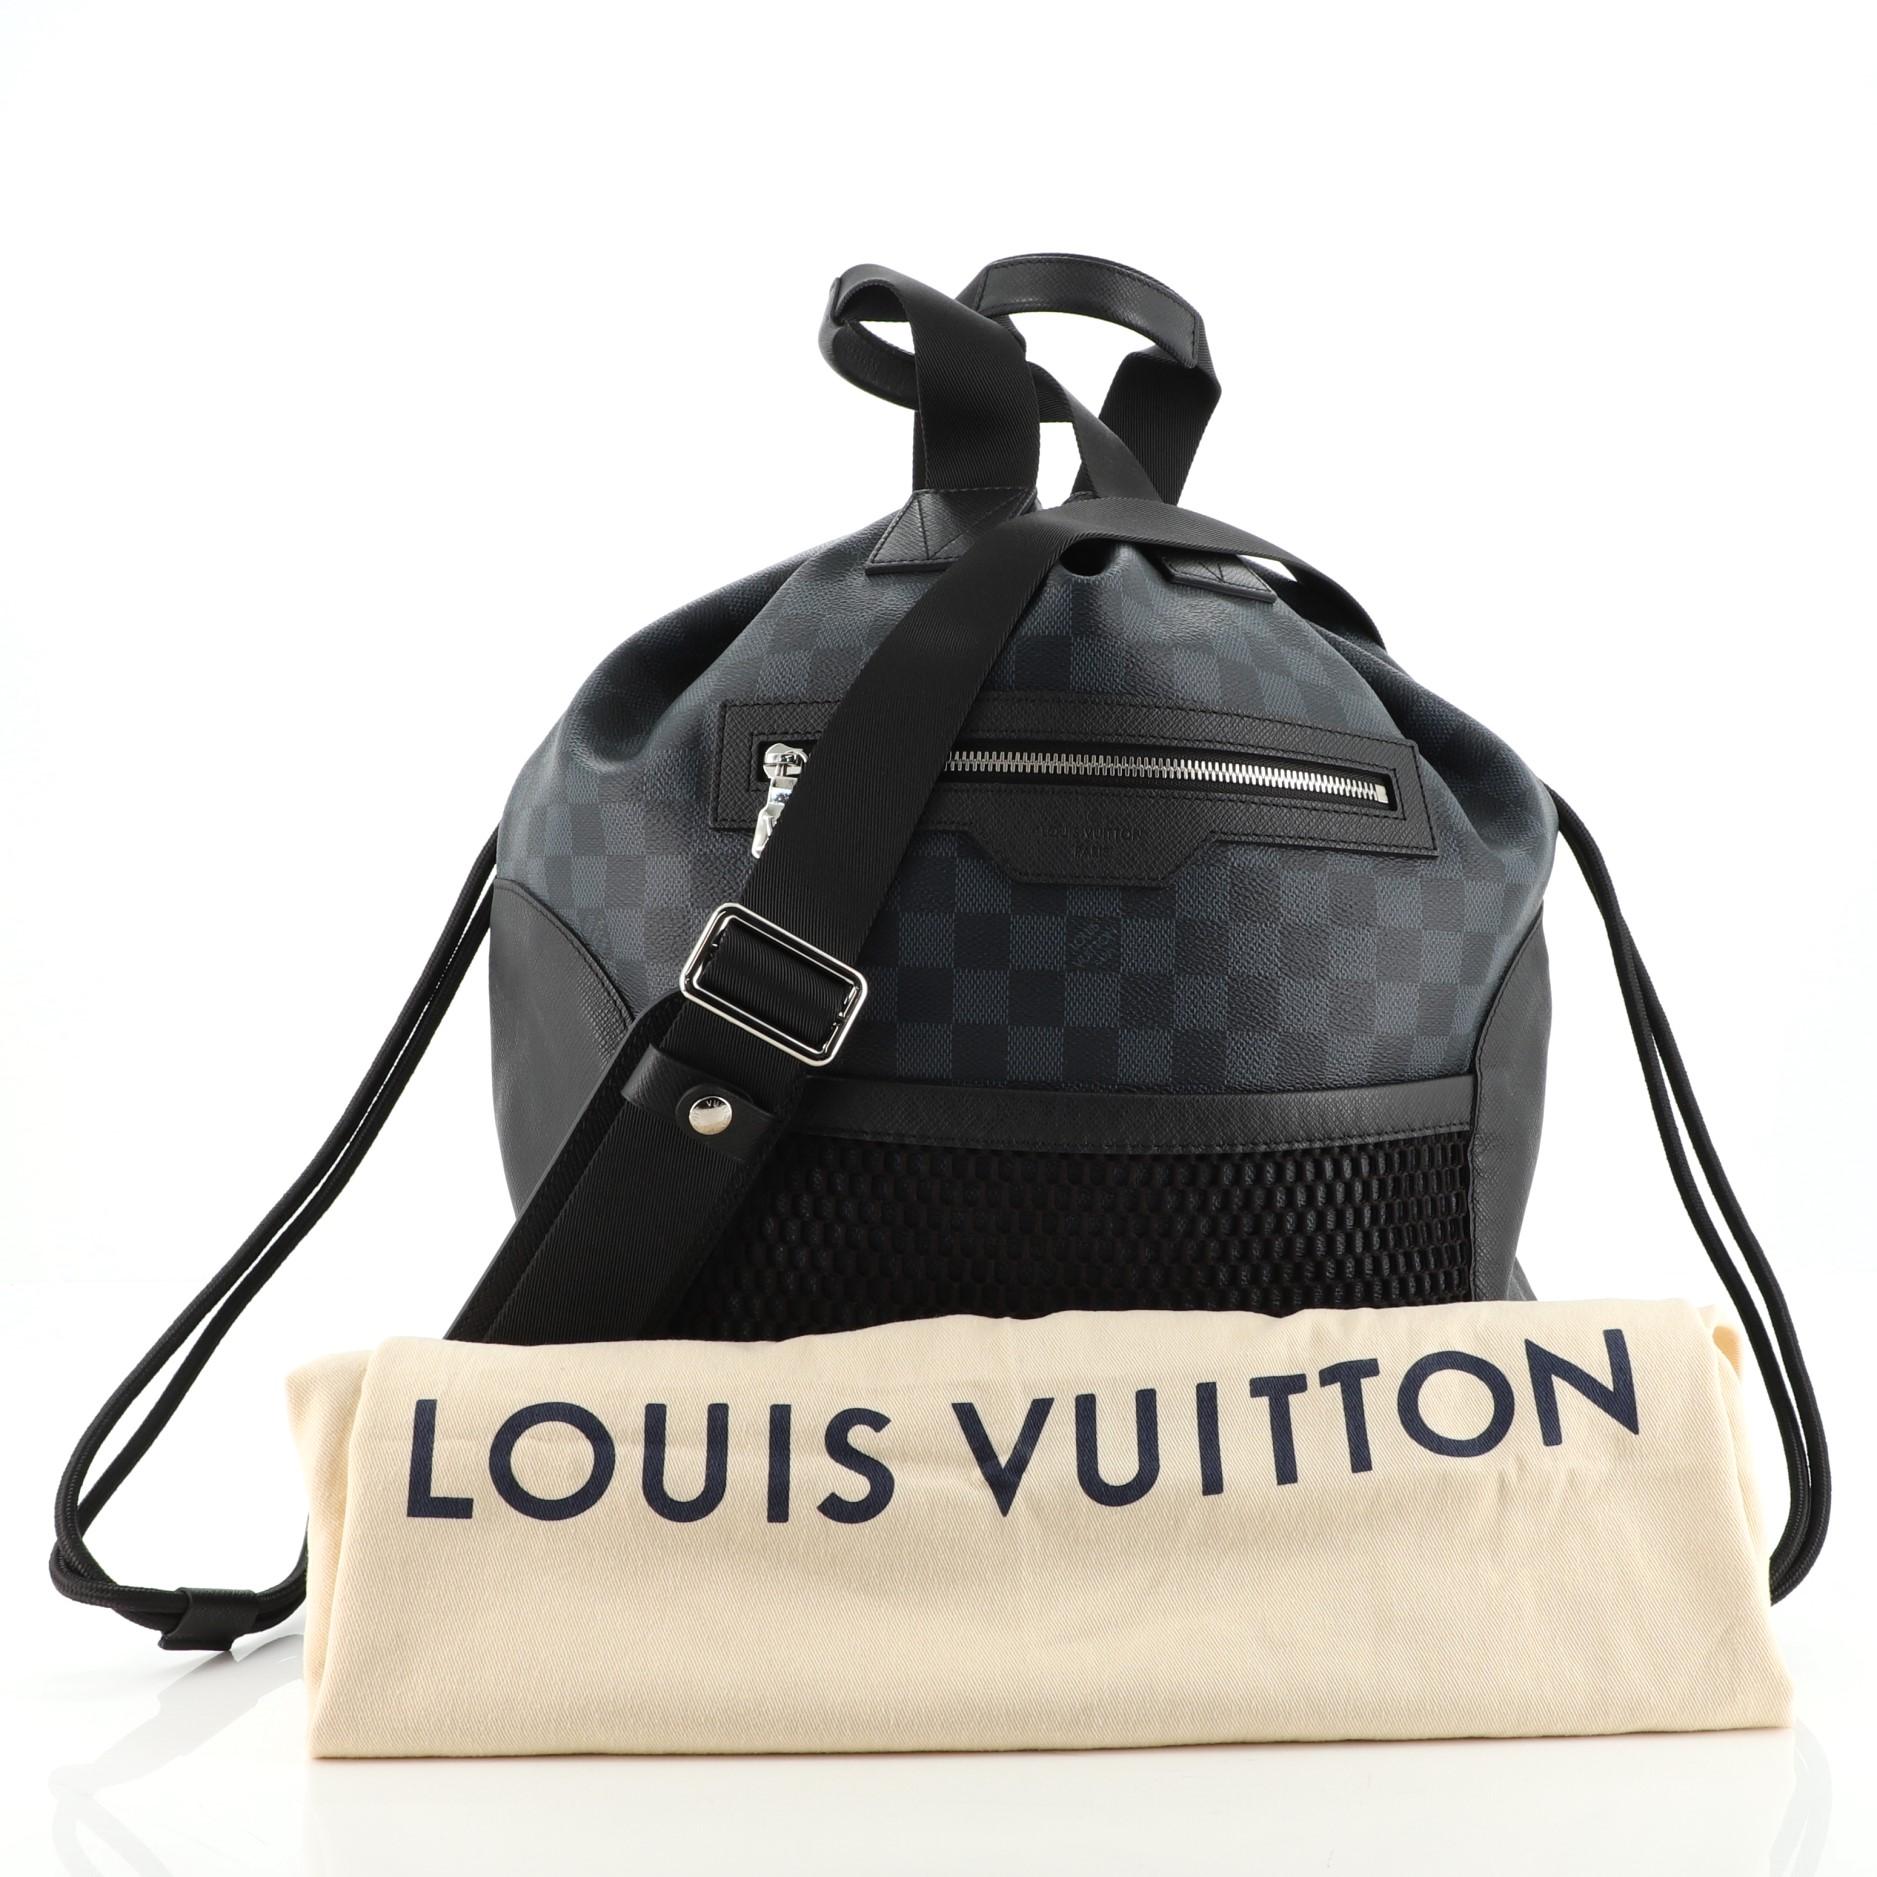 Louis Vuitton Hybrid - For Sale on 1stDibs